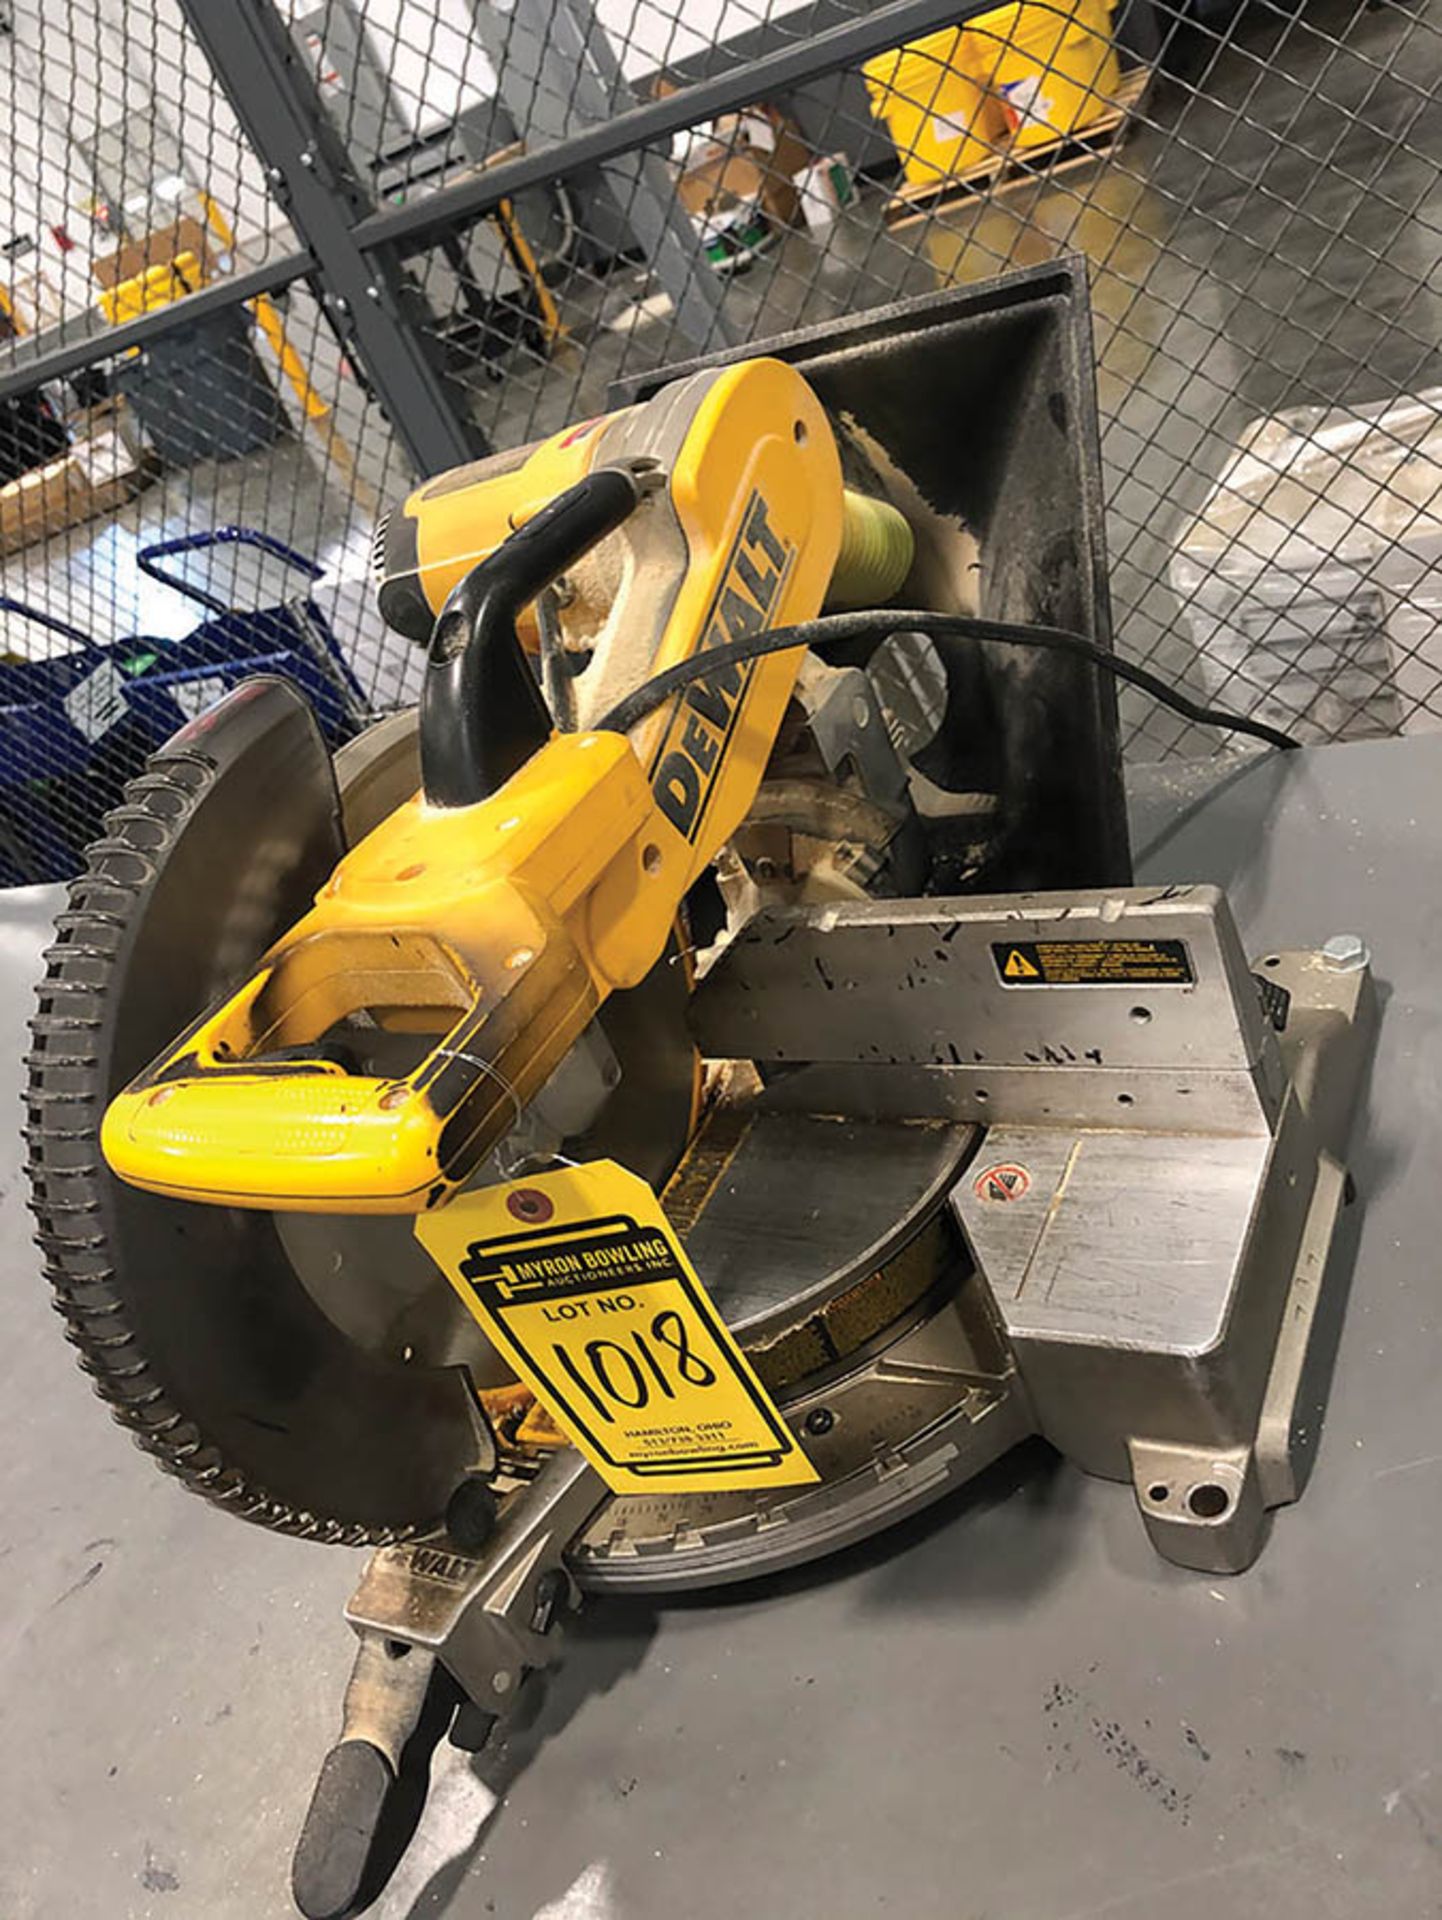 DEWALT 12'' DOUBLE BEVEL COMPOUND MITER SAW, MODEL DW716, S/N 8451, MOUNTED ON STEEL TABLE